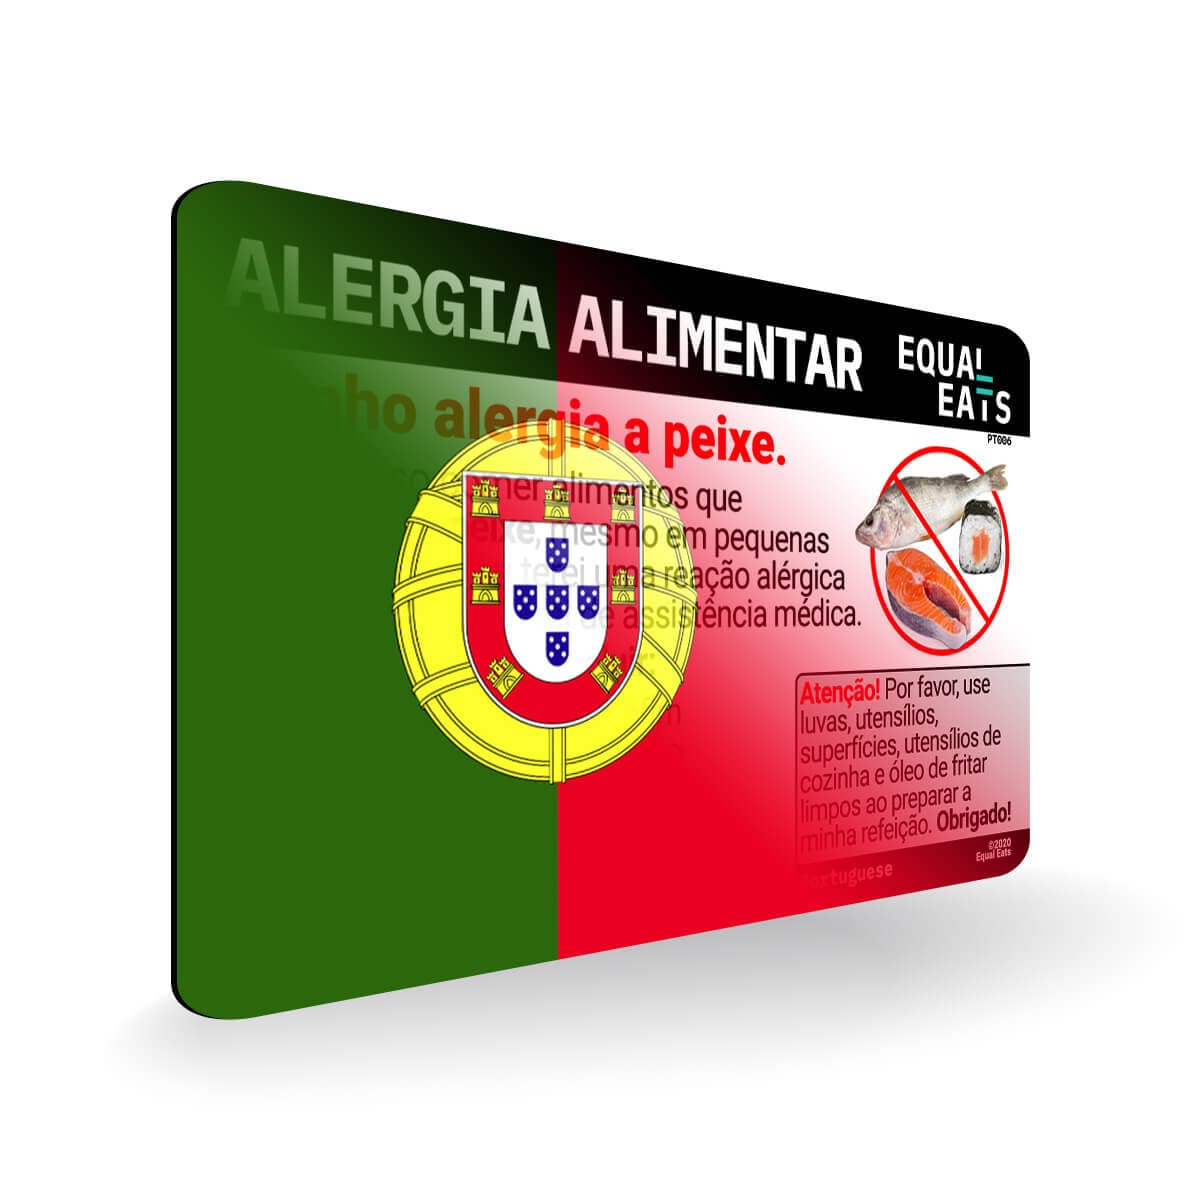 Fish Allergy in Portuguese. Fish Allergy Card for Portugal